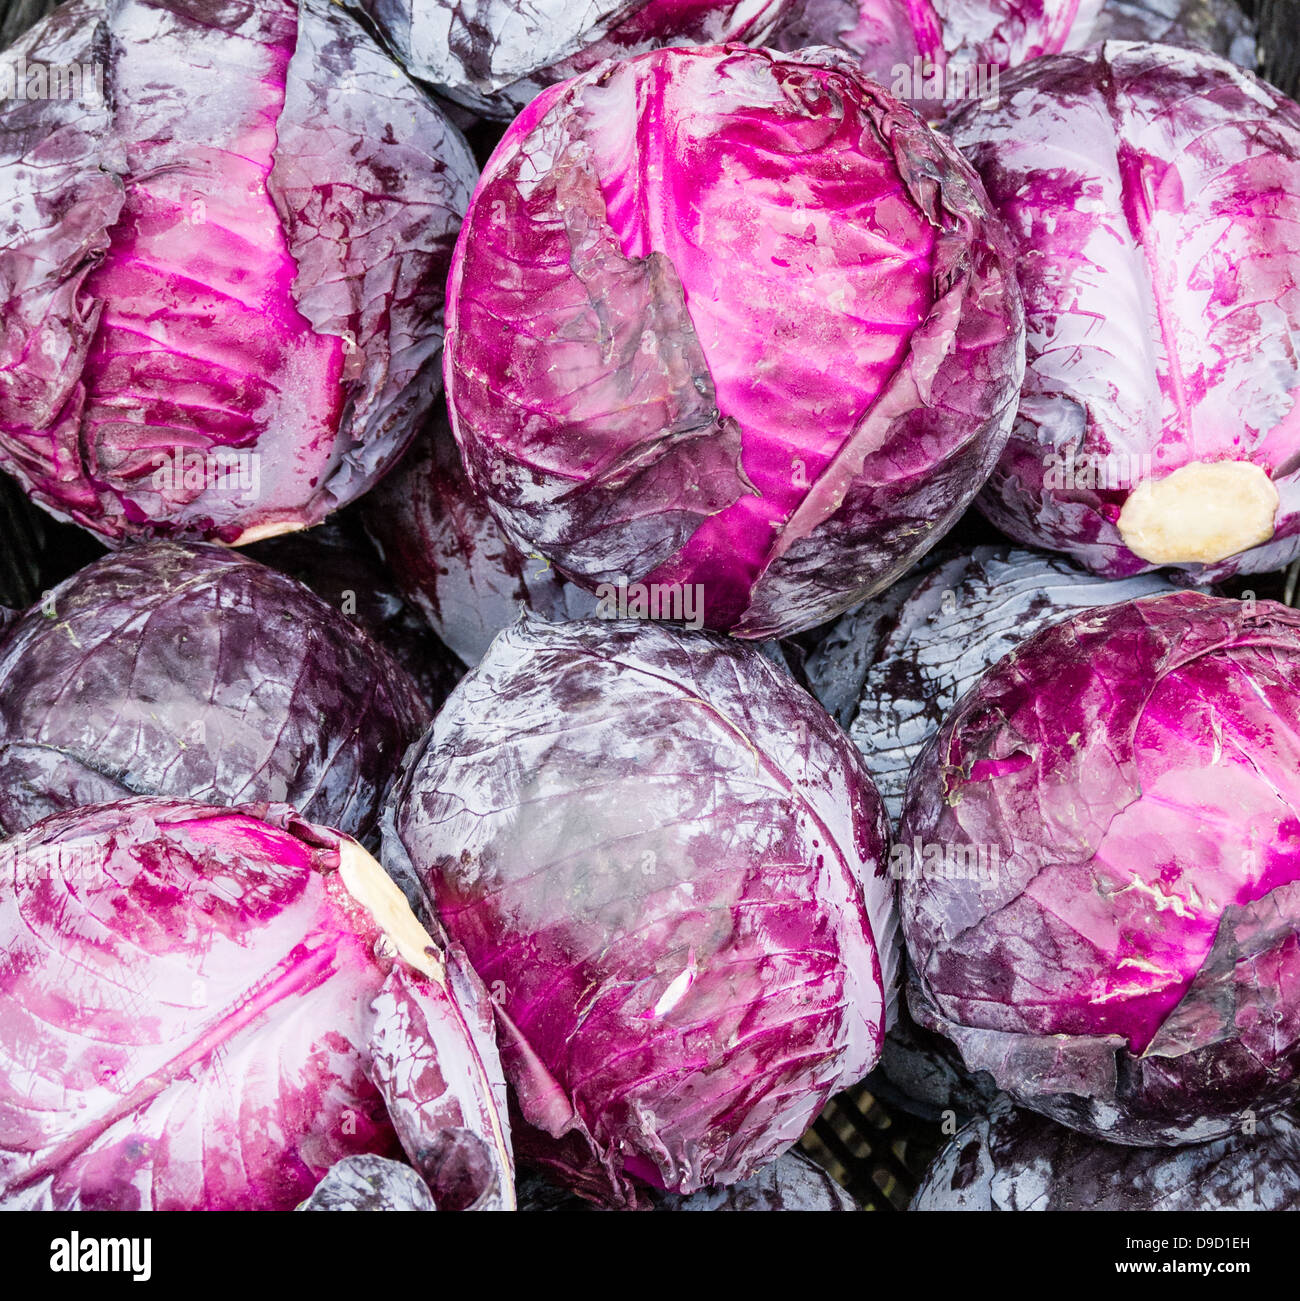 Fresh picked red cabbage on display at the farmer's market Stock Photo